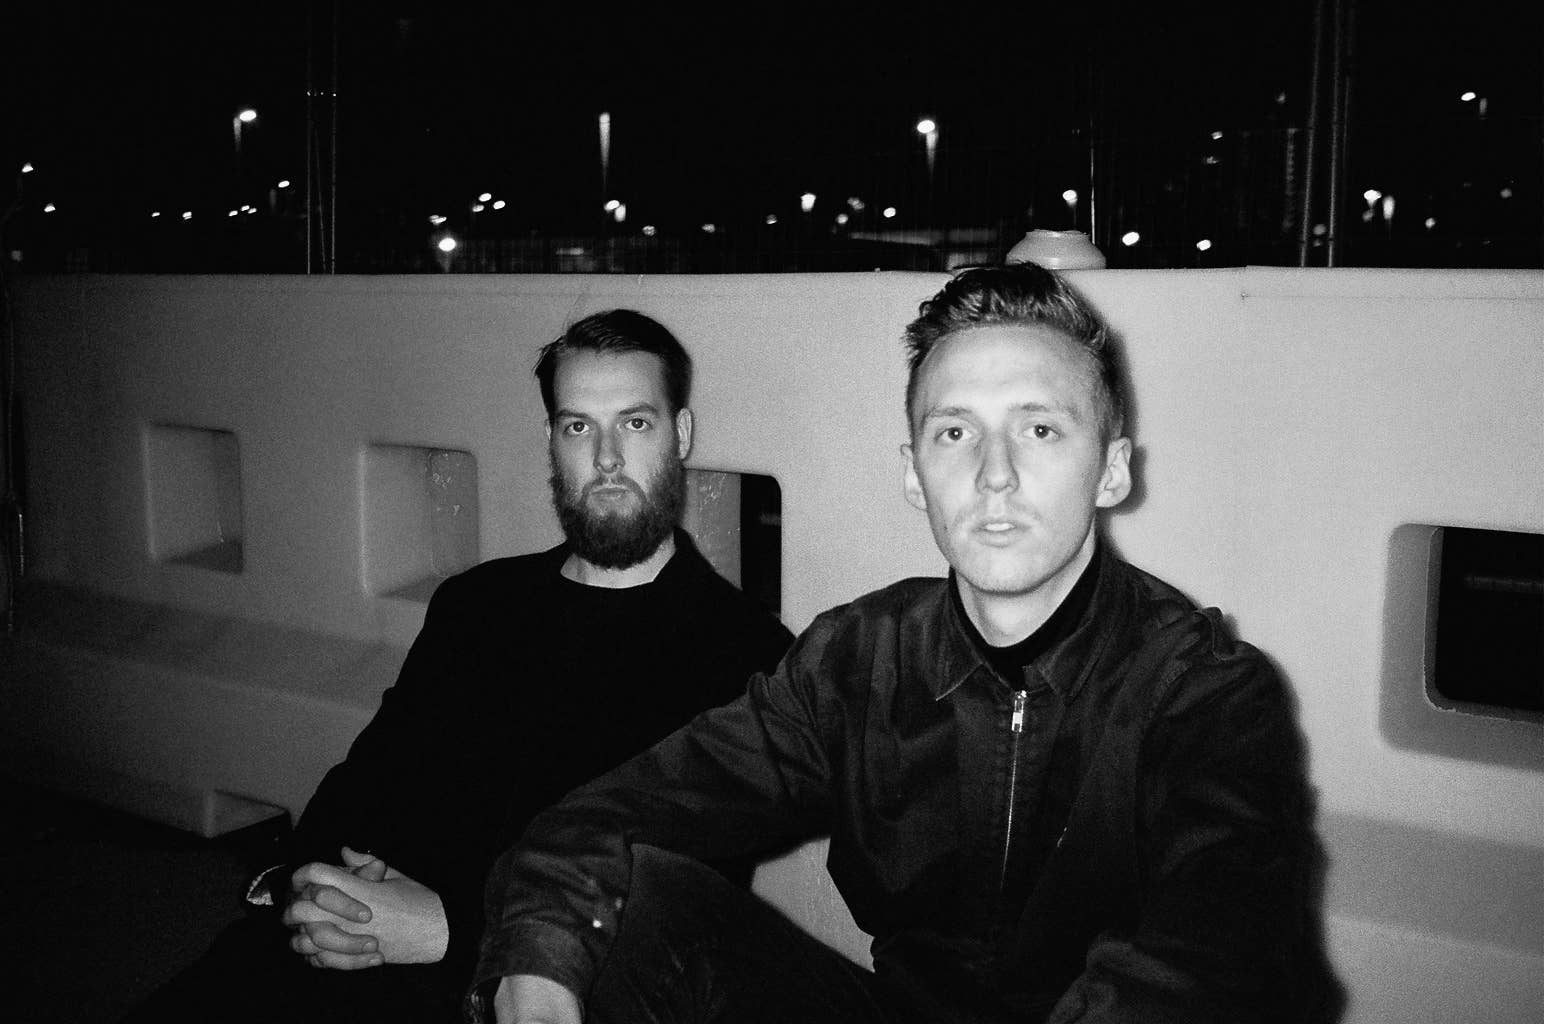 Honne by Will Coutts